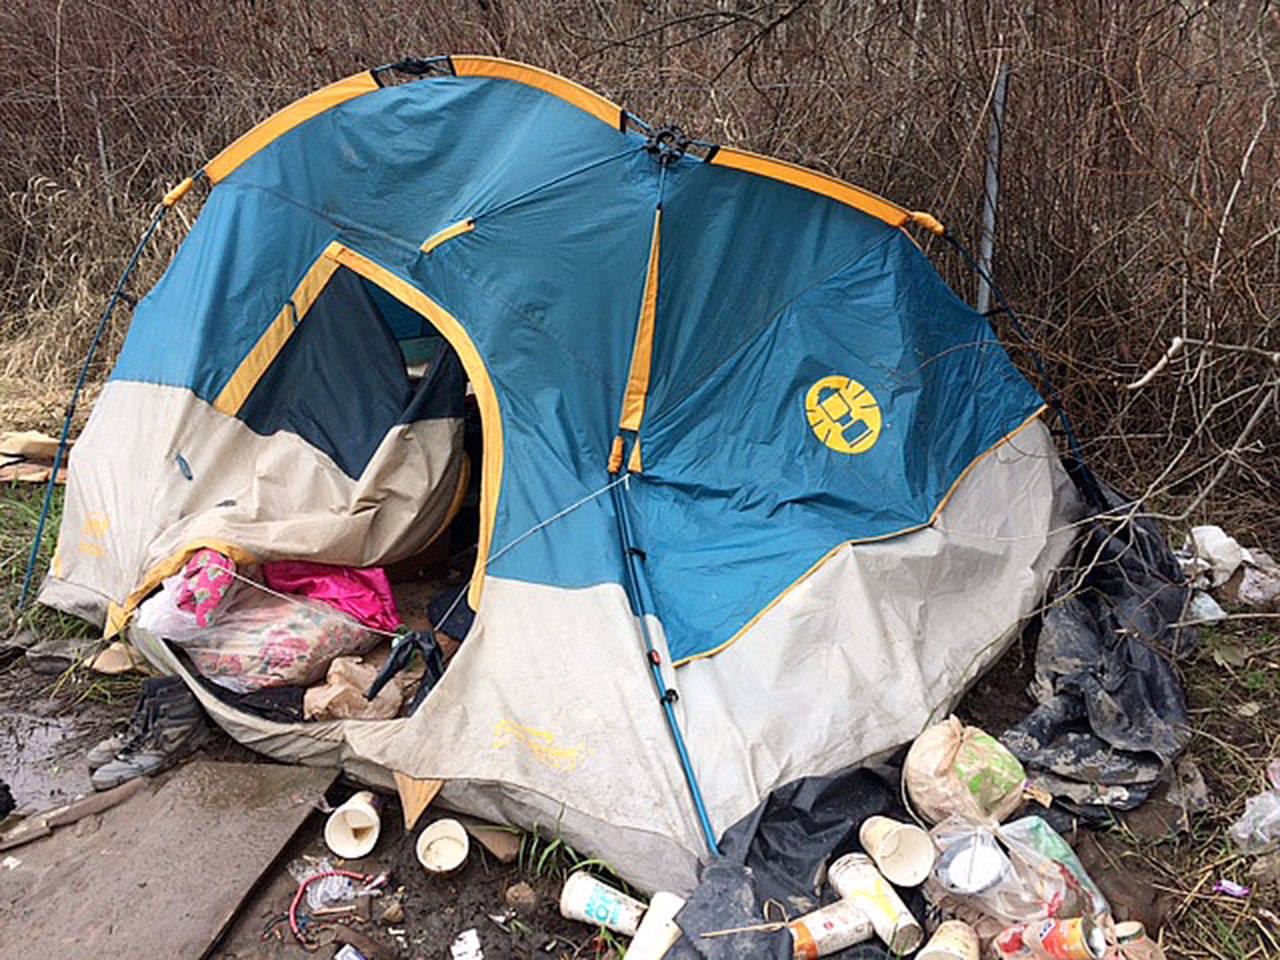 A homeless encampment in Bellevue. Photo courtesy of Bellevue Police Department